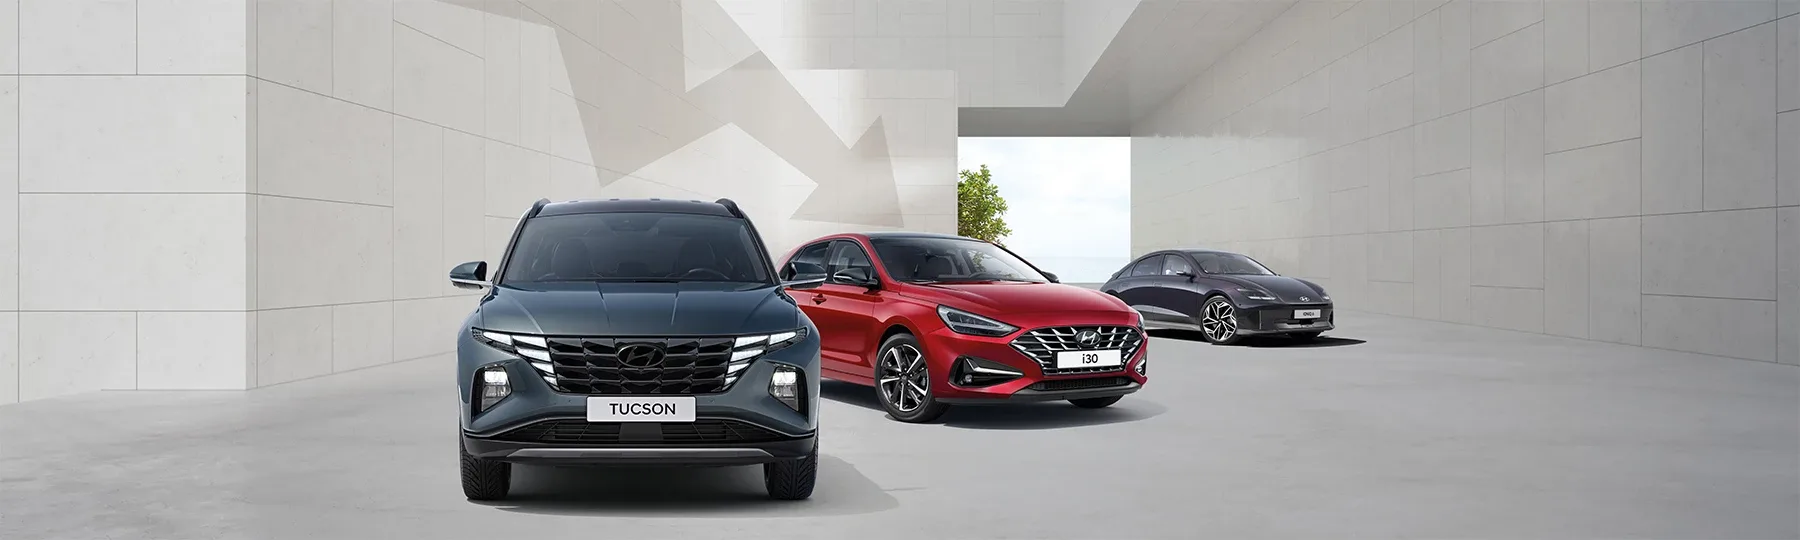 News: Hyundai Inflation ist out